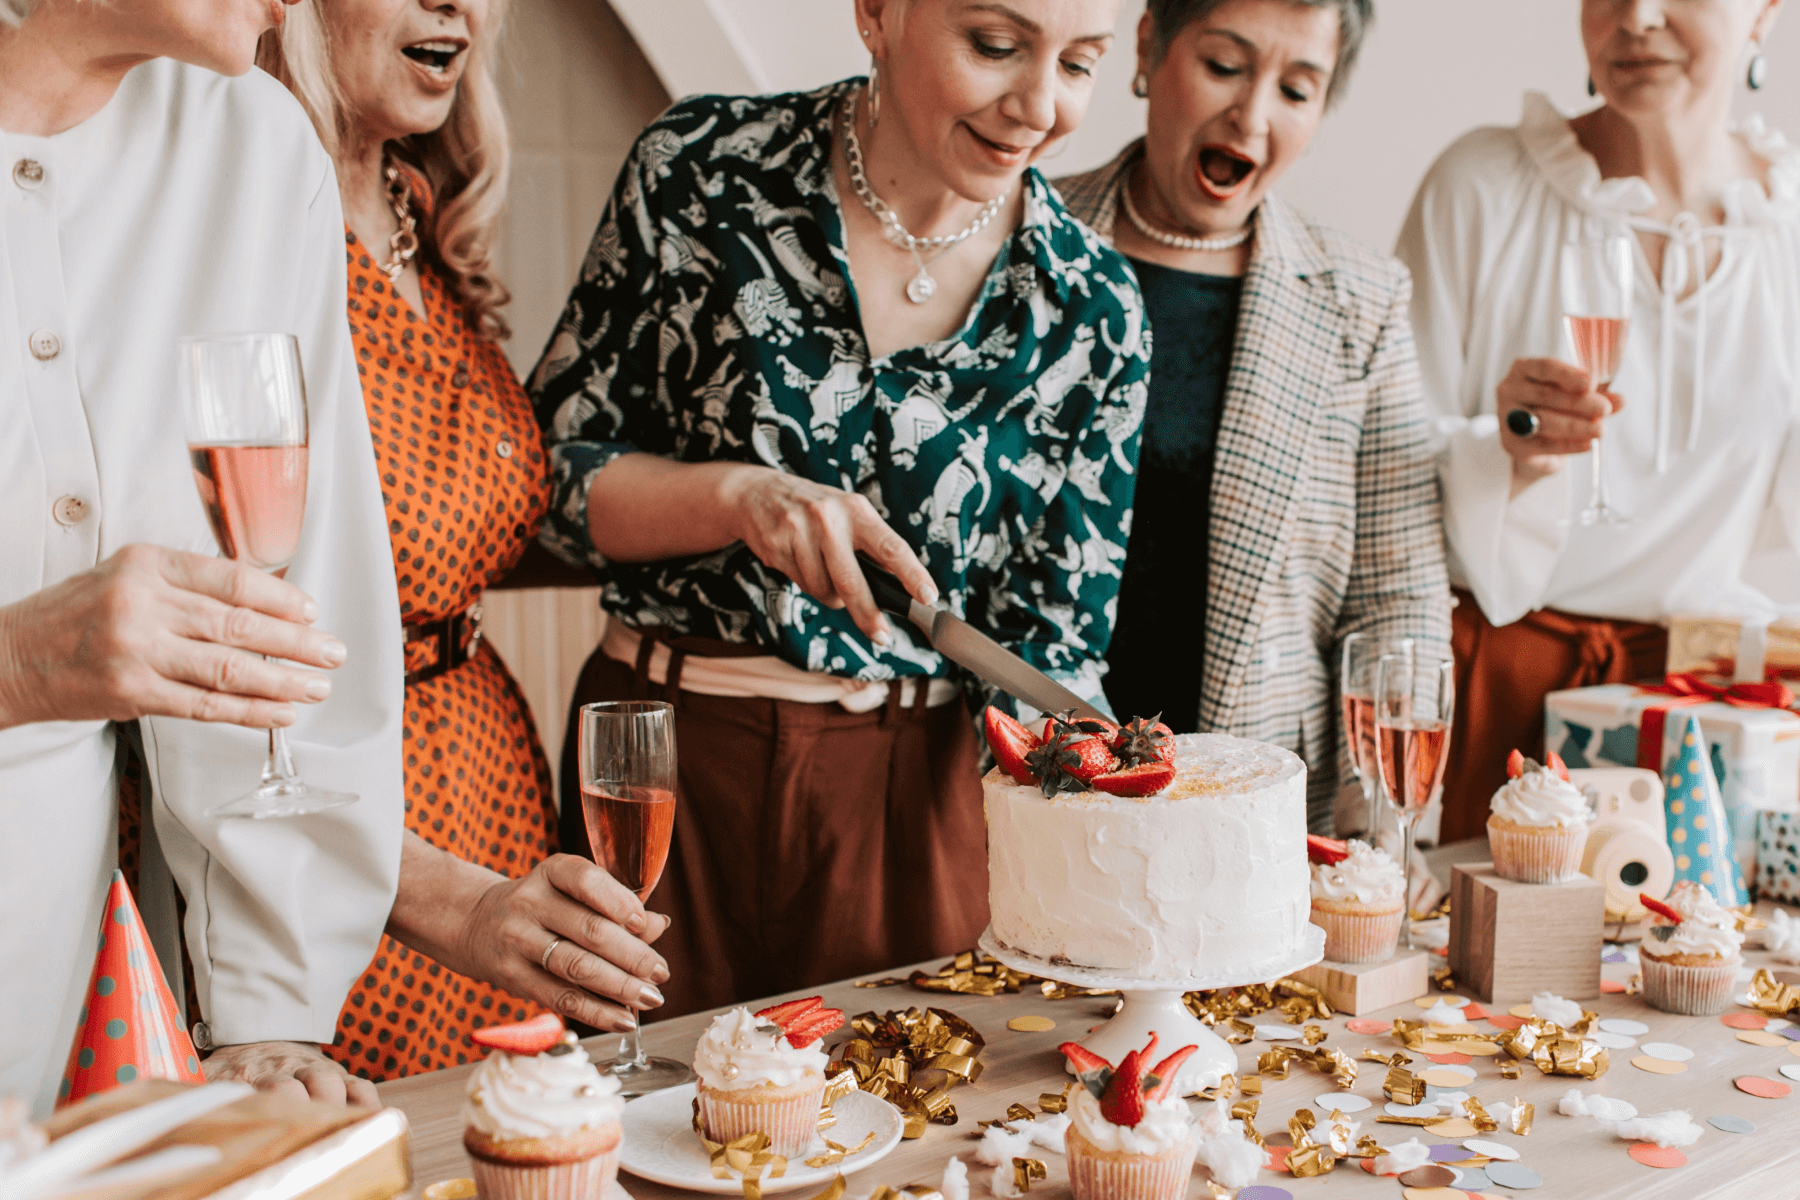 Five women gather around a table covered in cupcakes, party hats, confetti, and glasses of pink wine while one cuts into a white cake with strawberries on it.